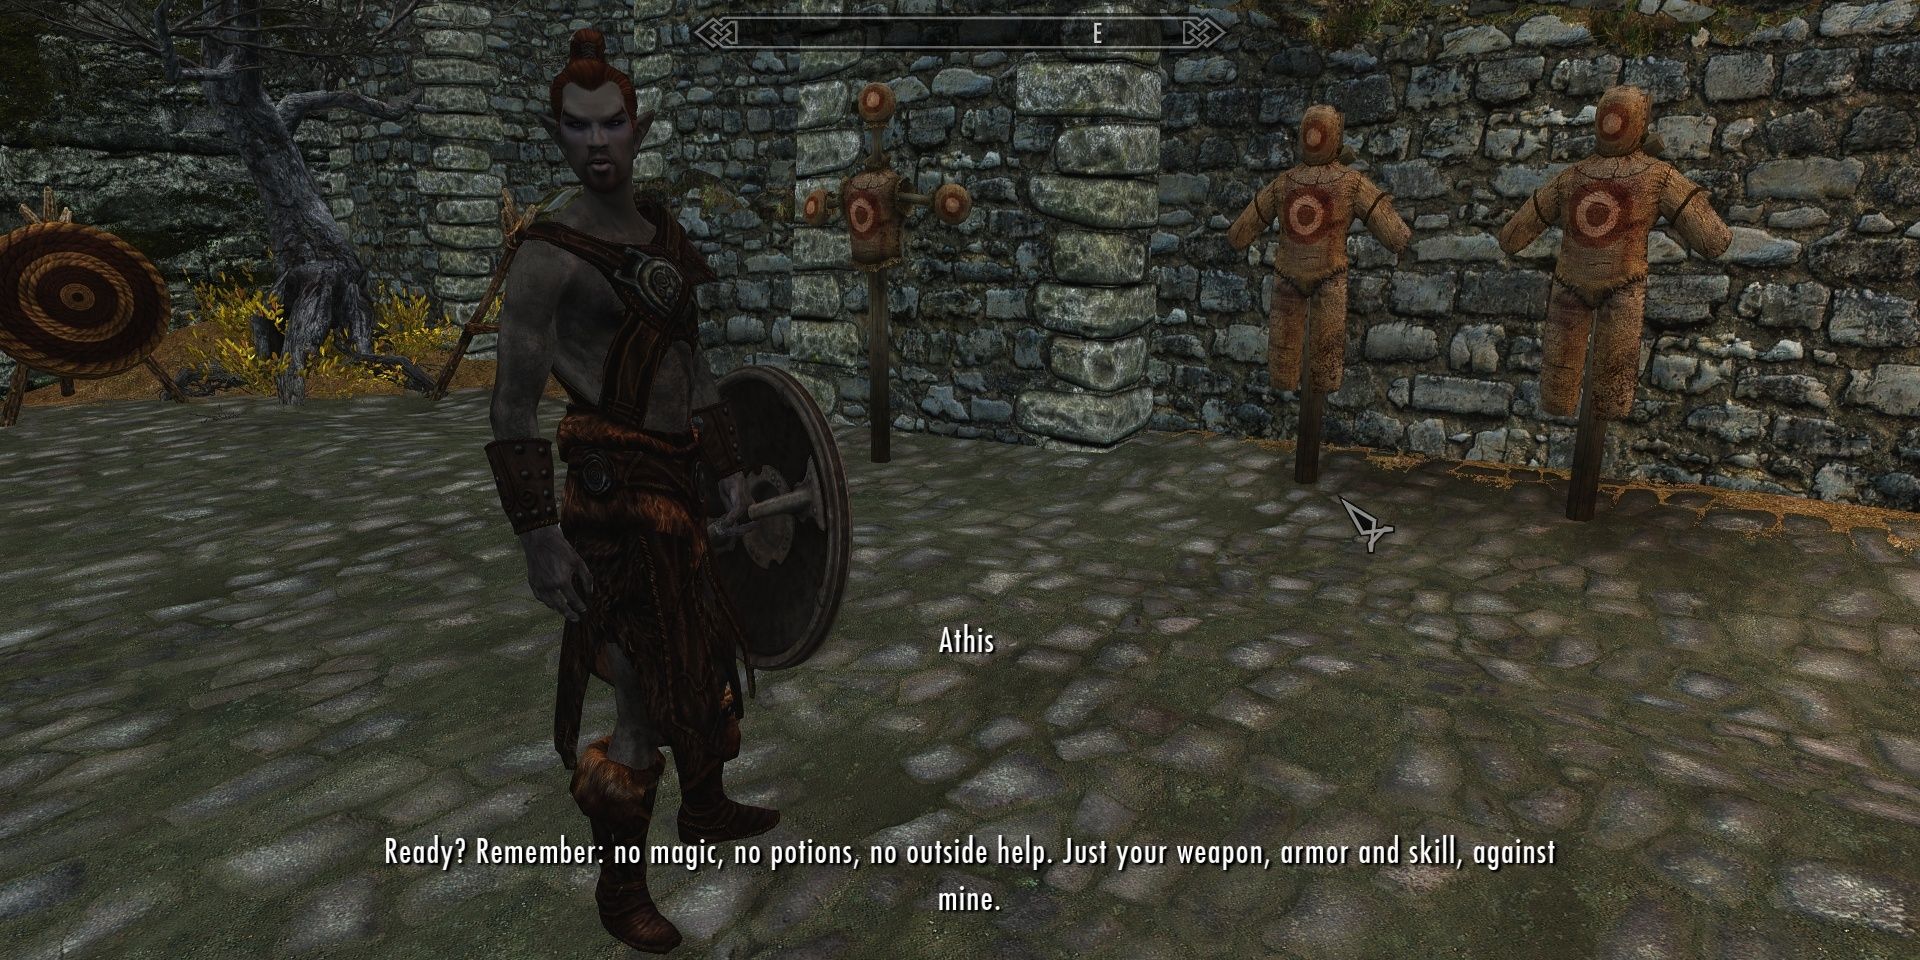 skyrim how to get married as a elf